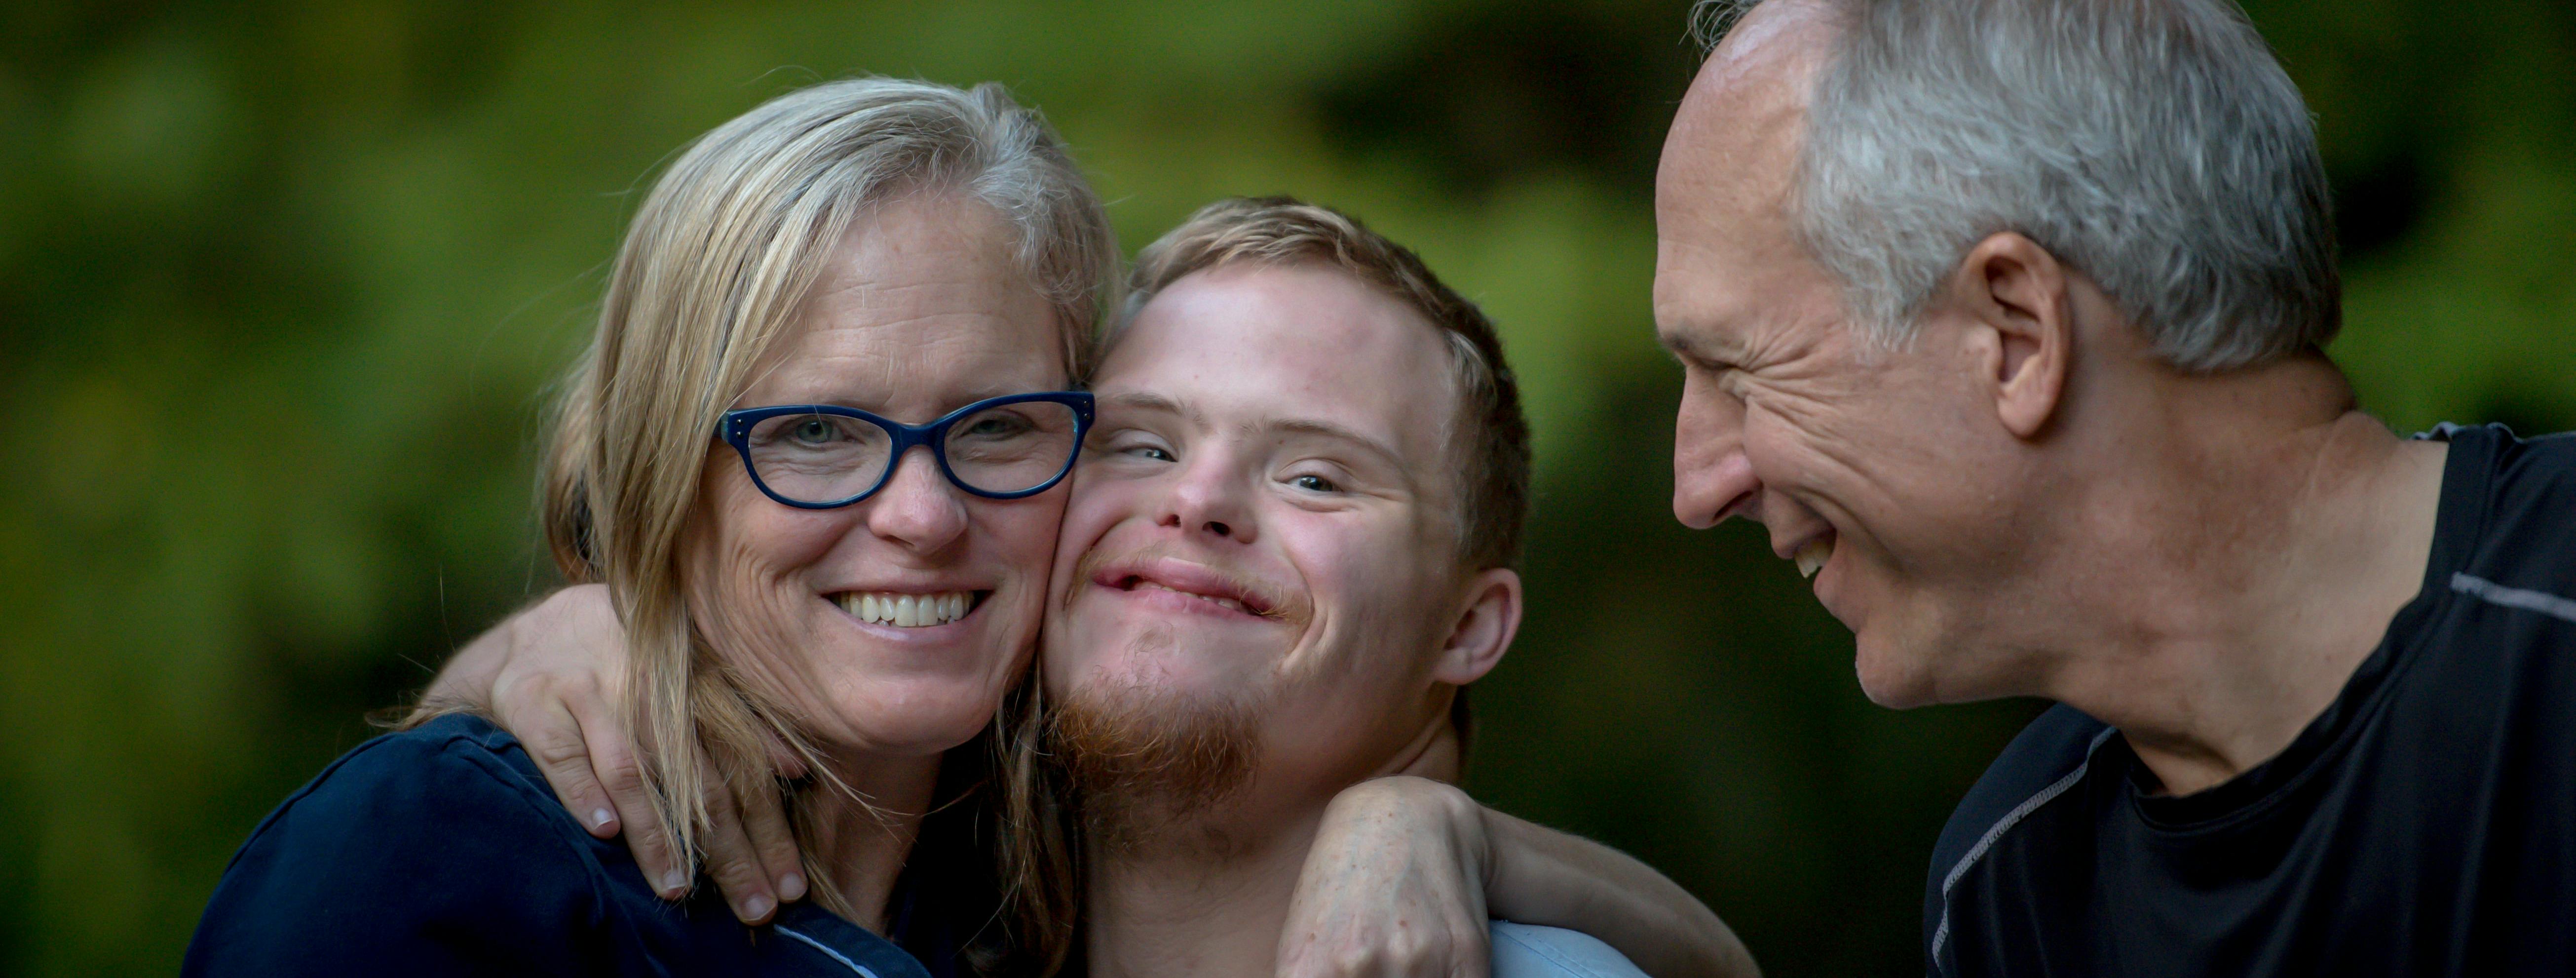 A young man with Down's Syndrome stands smiling with his parents